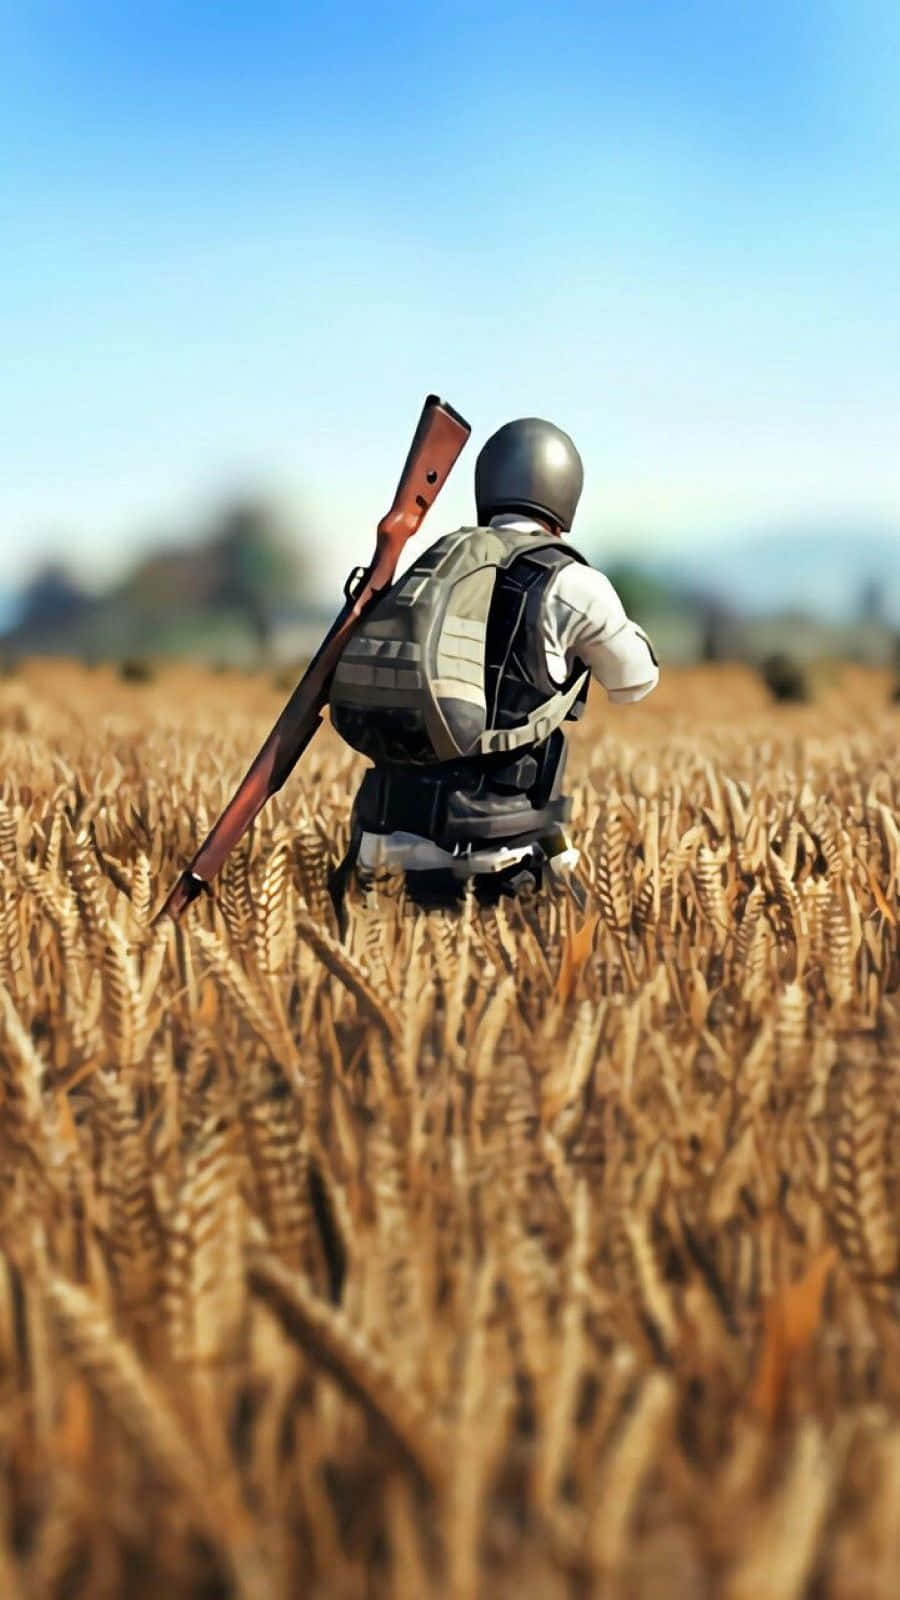 Do you have what it takes to become a PUBG Mobile champion?" Wallpaper